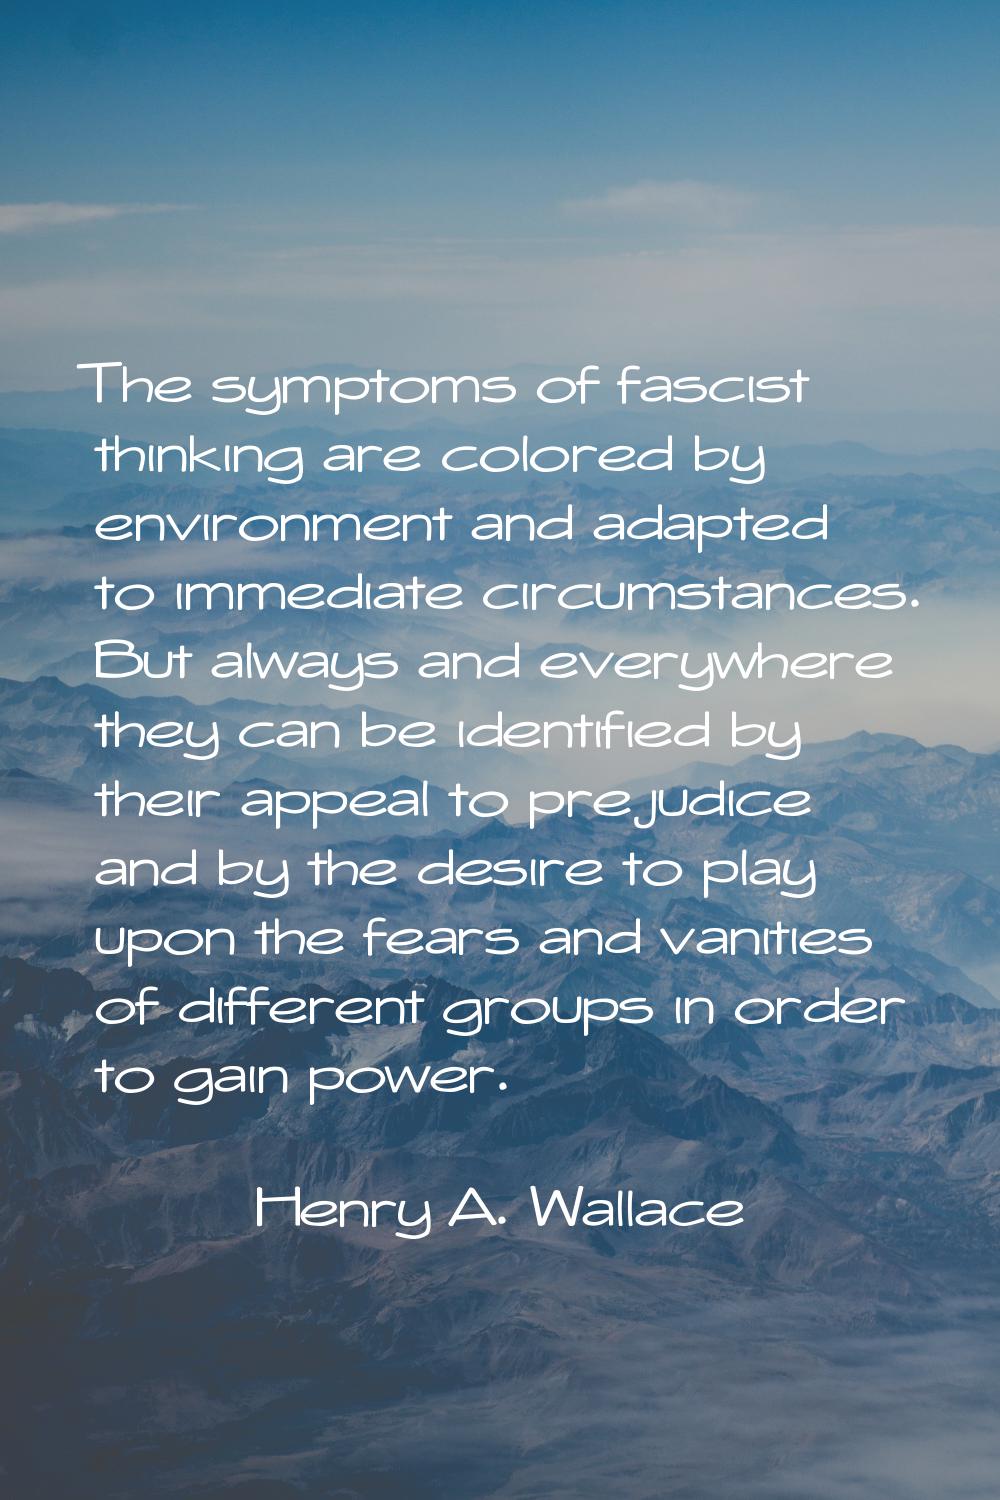 The symptoms of fascist thinking are colored by environment and adapted to immediate circumstances.